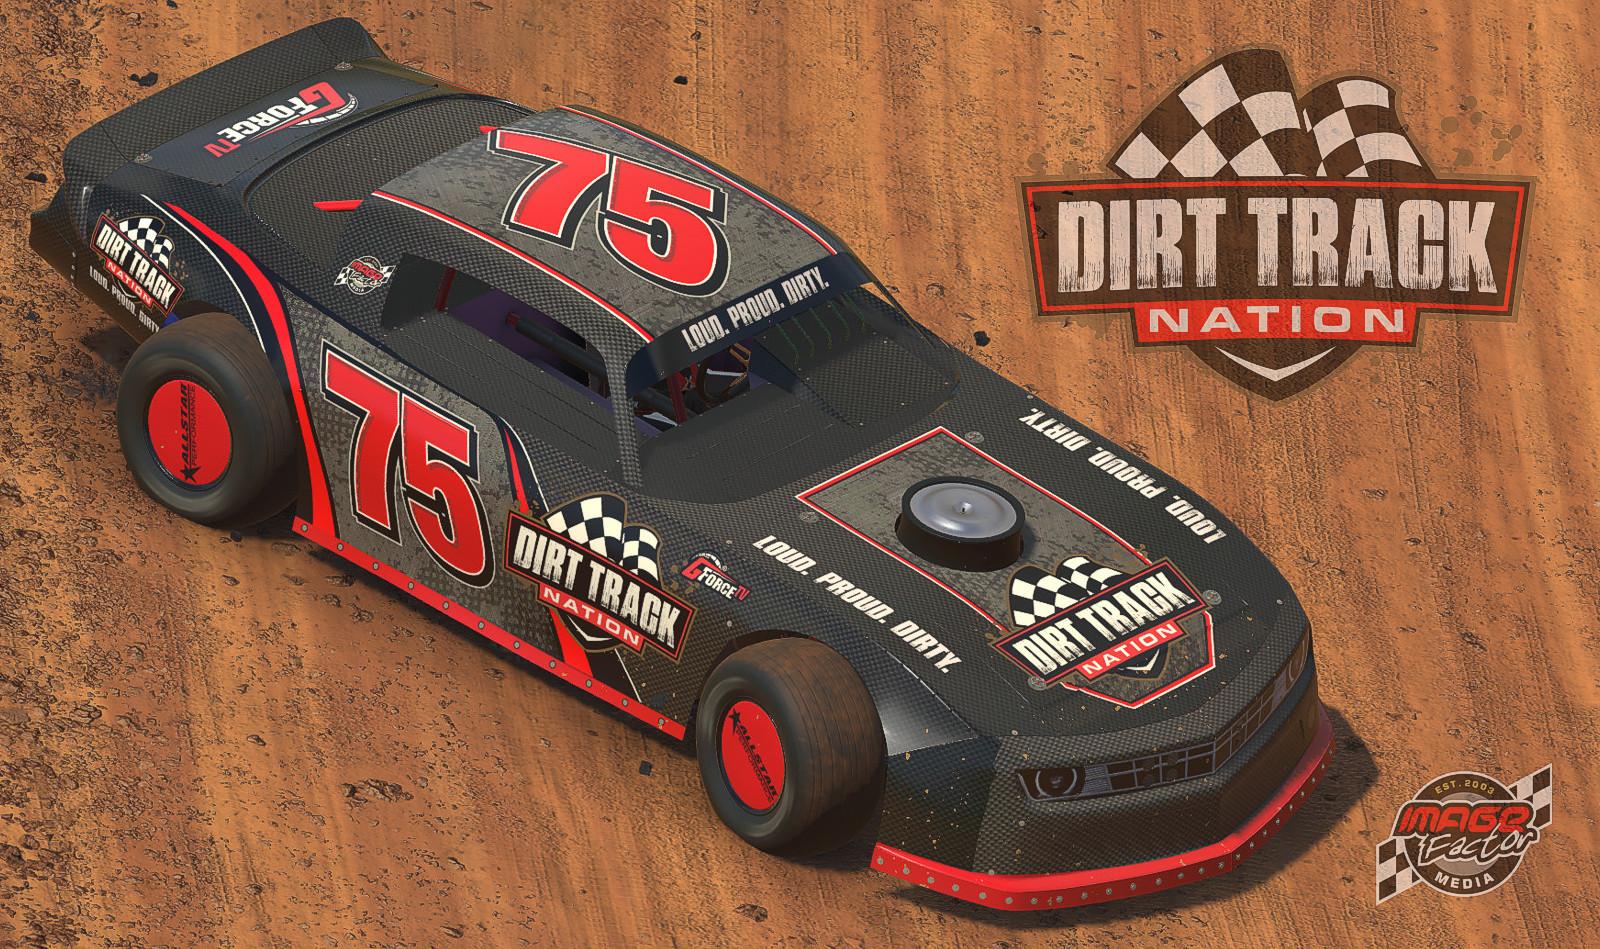 Preview of Dirt Track Nation Dirt Street Stock by Greg Calnan